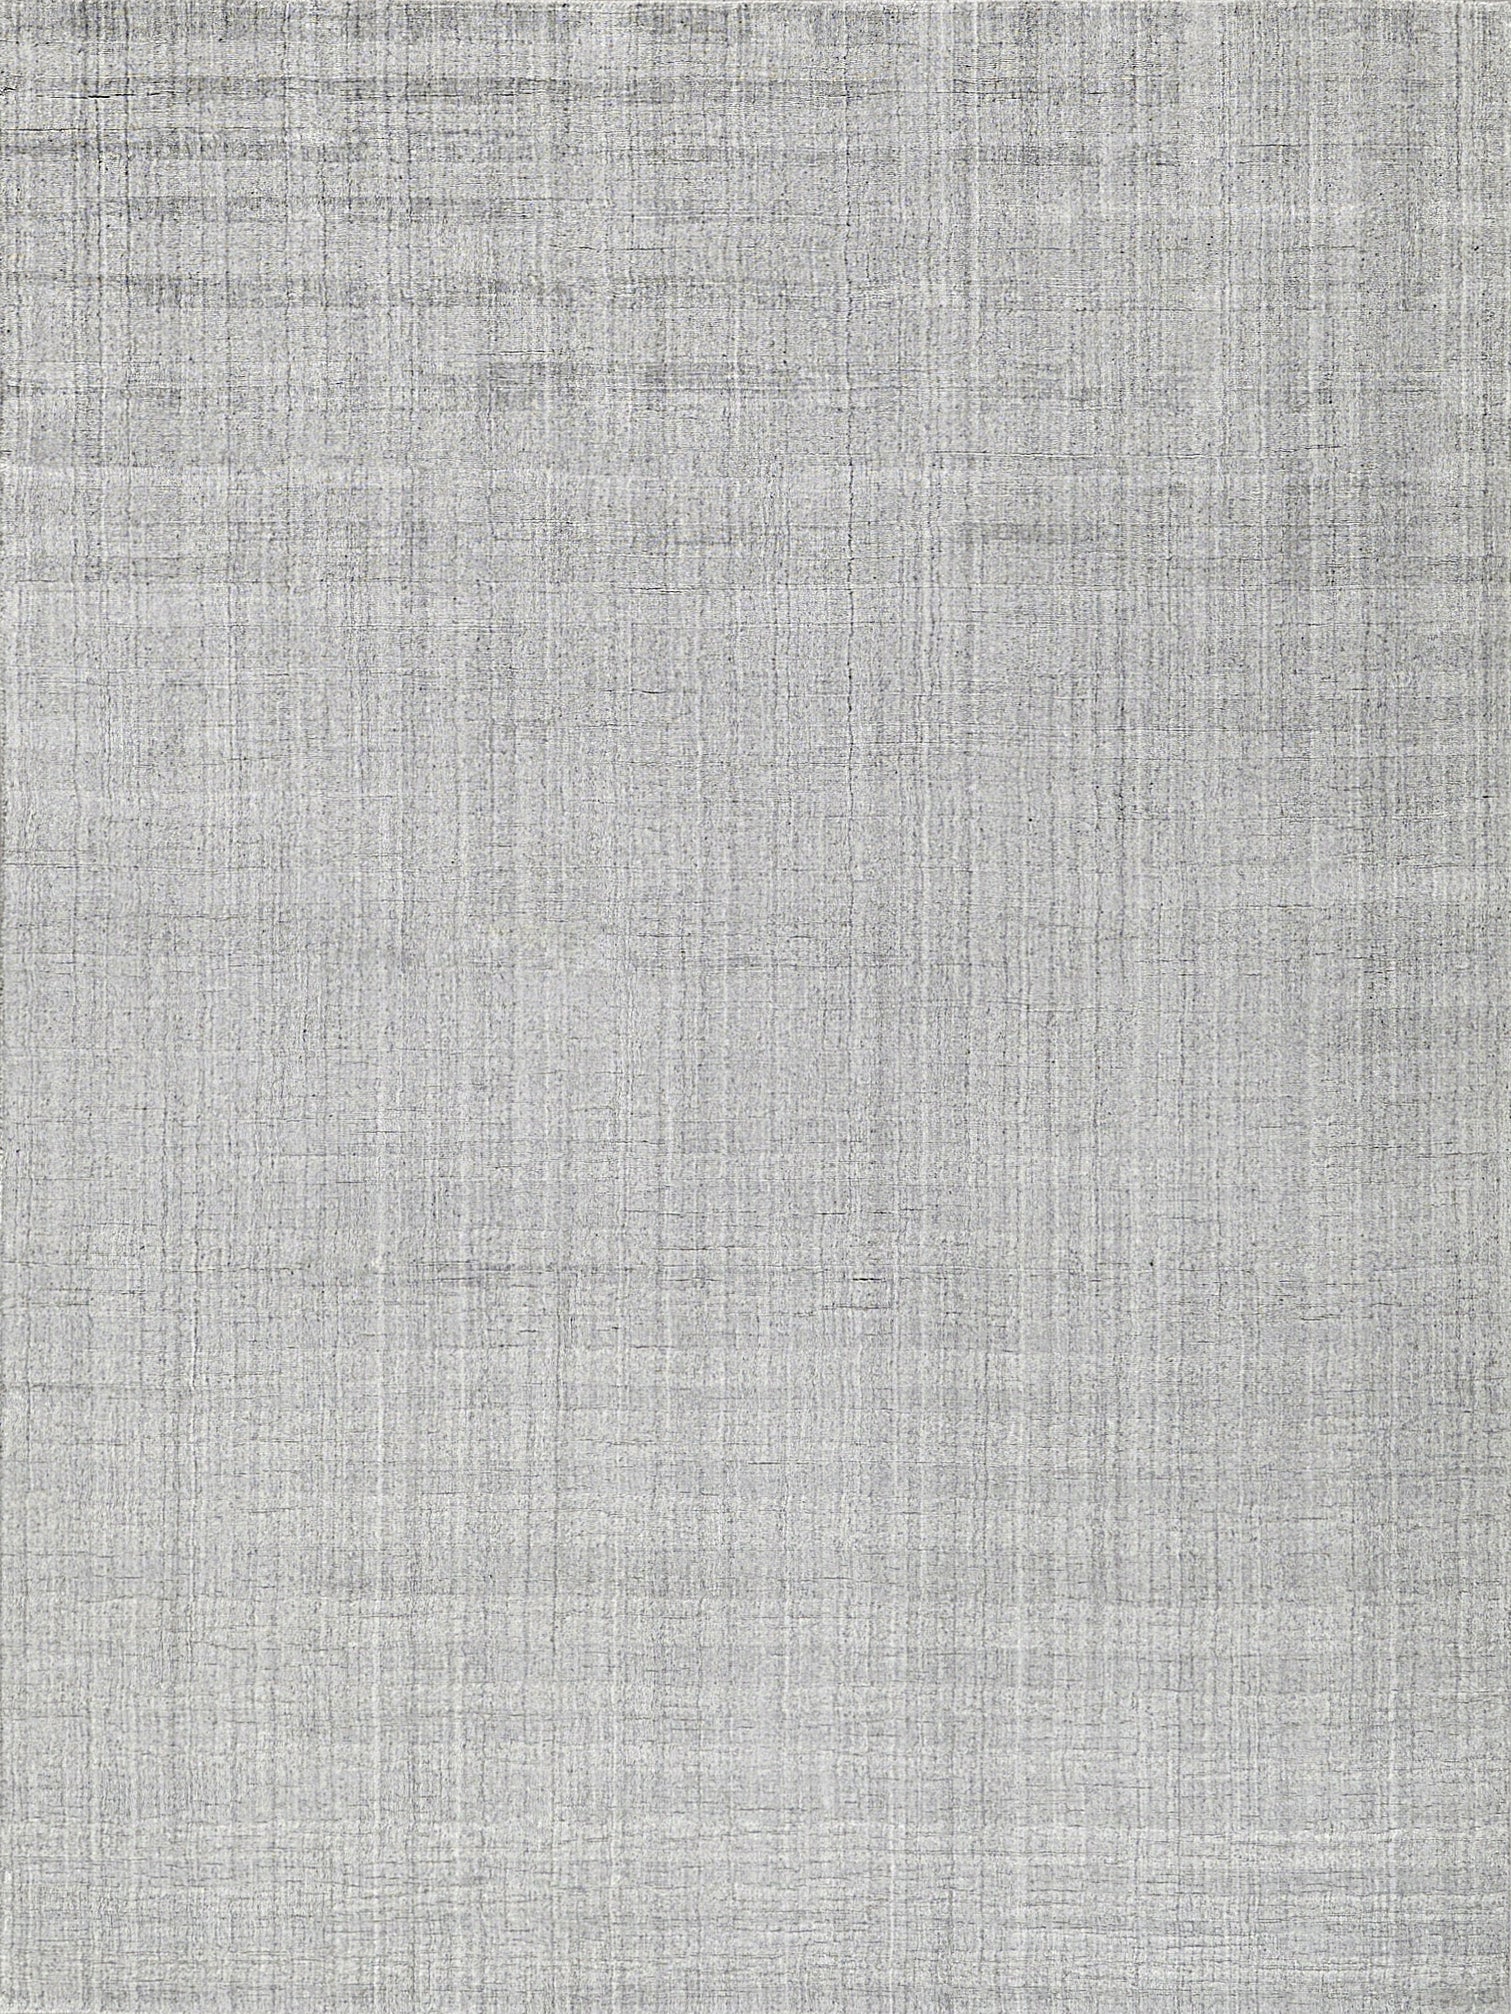 Exquisite Rugs Robin Stripe 5624 Light Silver Area Rug